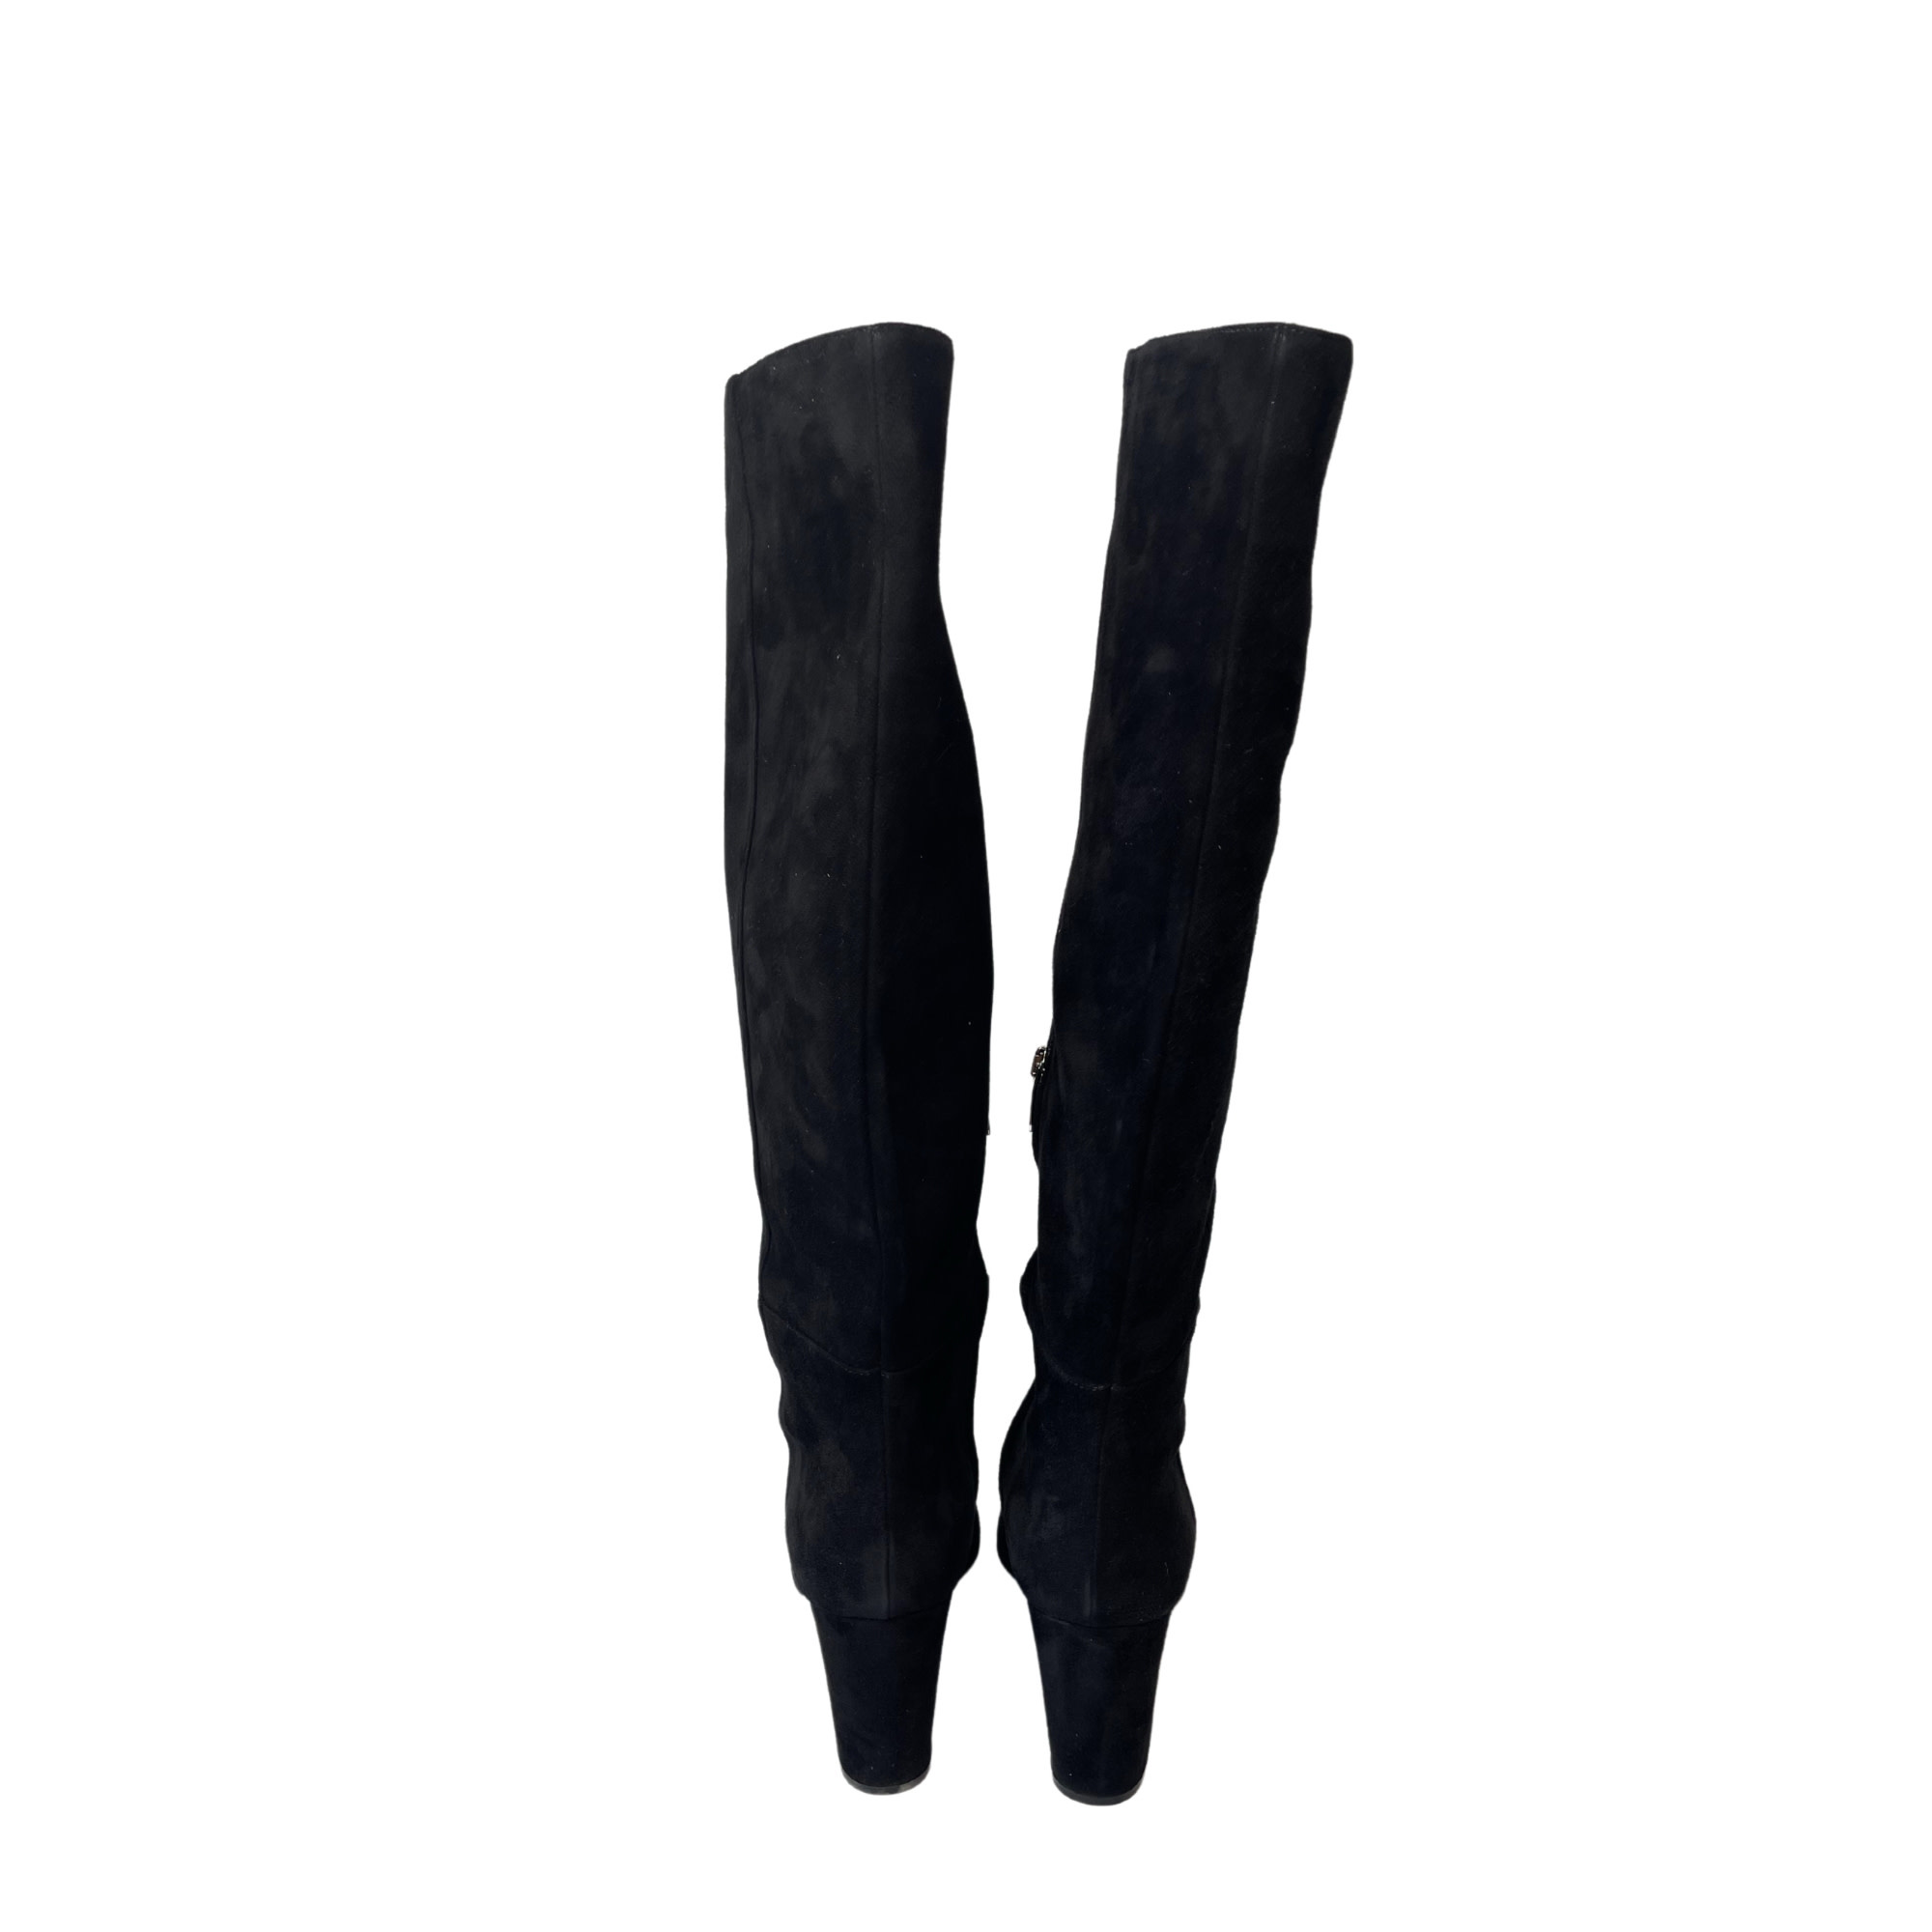 SERGIO ROSSI BLACK SUEDE OVER THE KNEE BOOTS (40 EU)